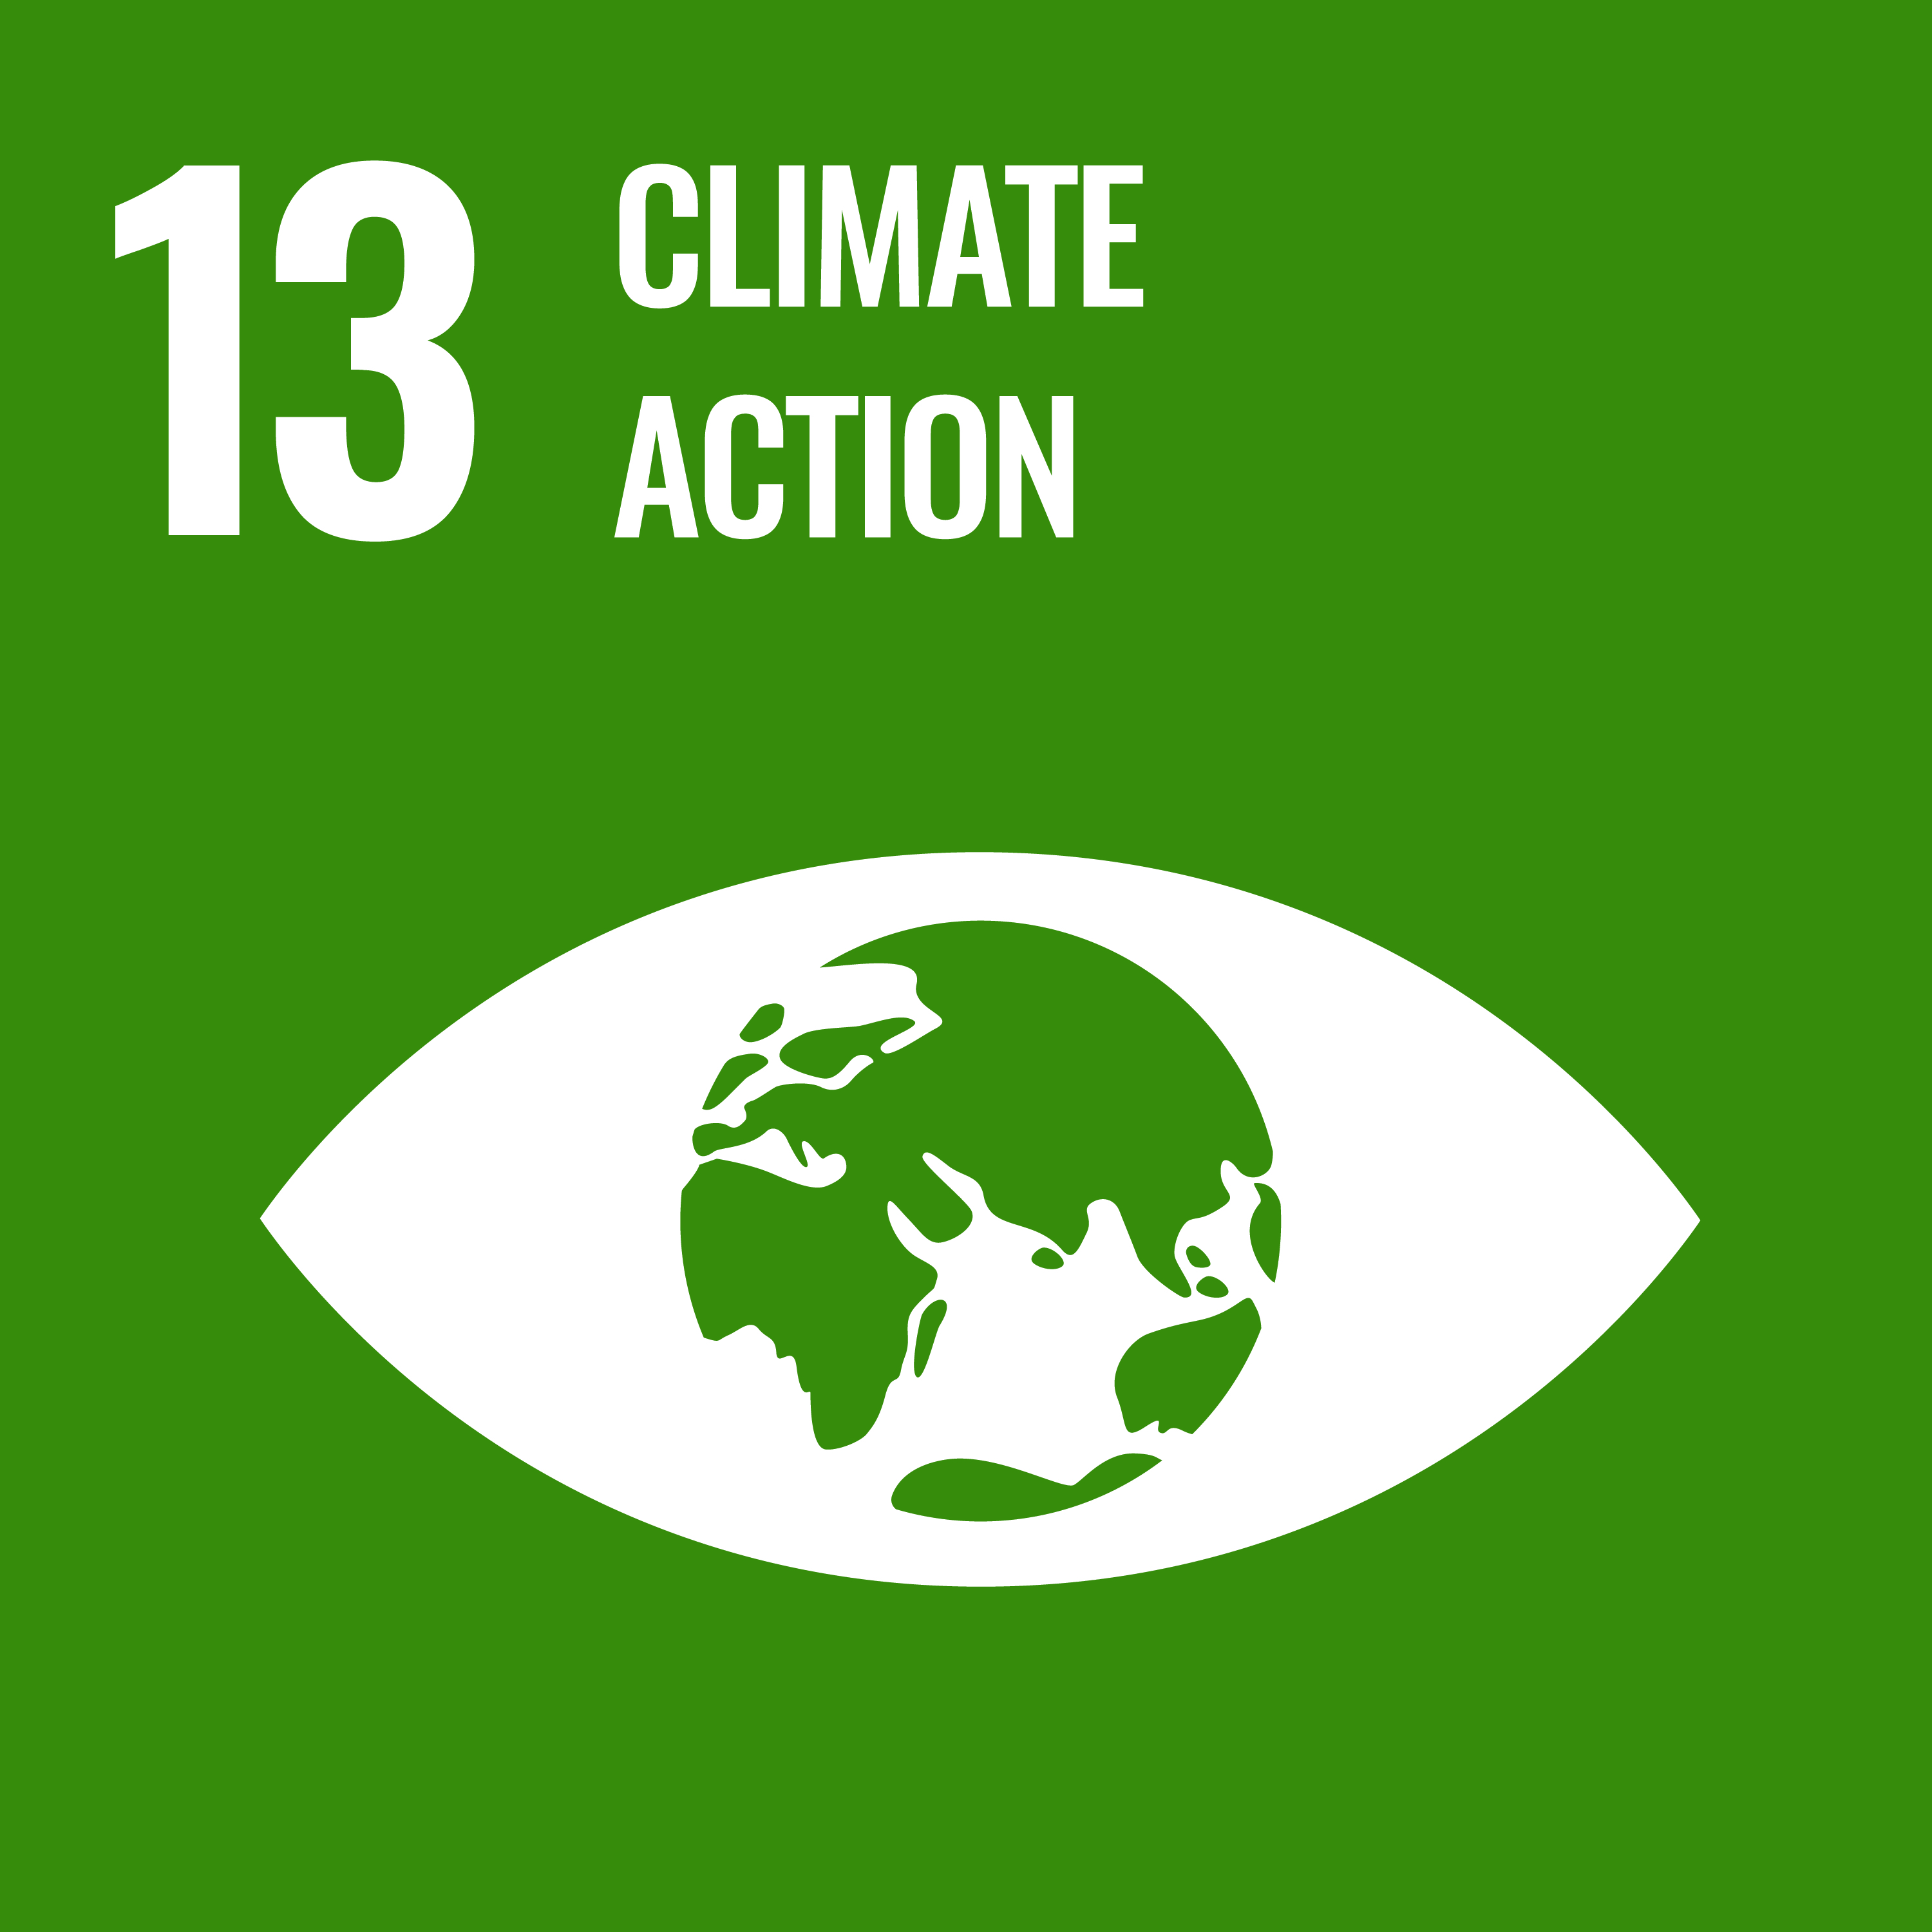 A green icon depicting the earth in an eyeball and the text "13: climate action"